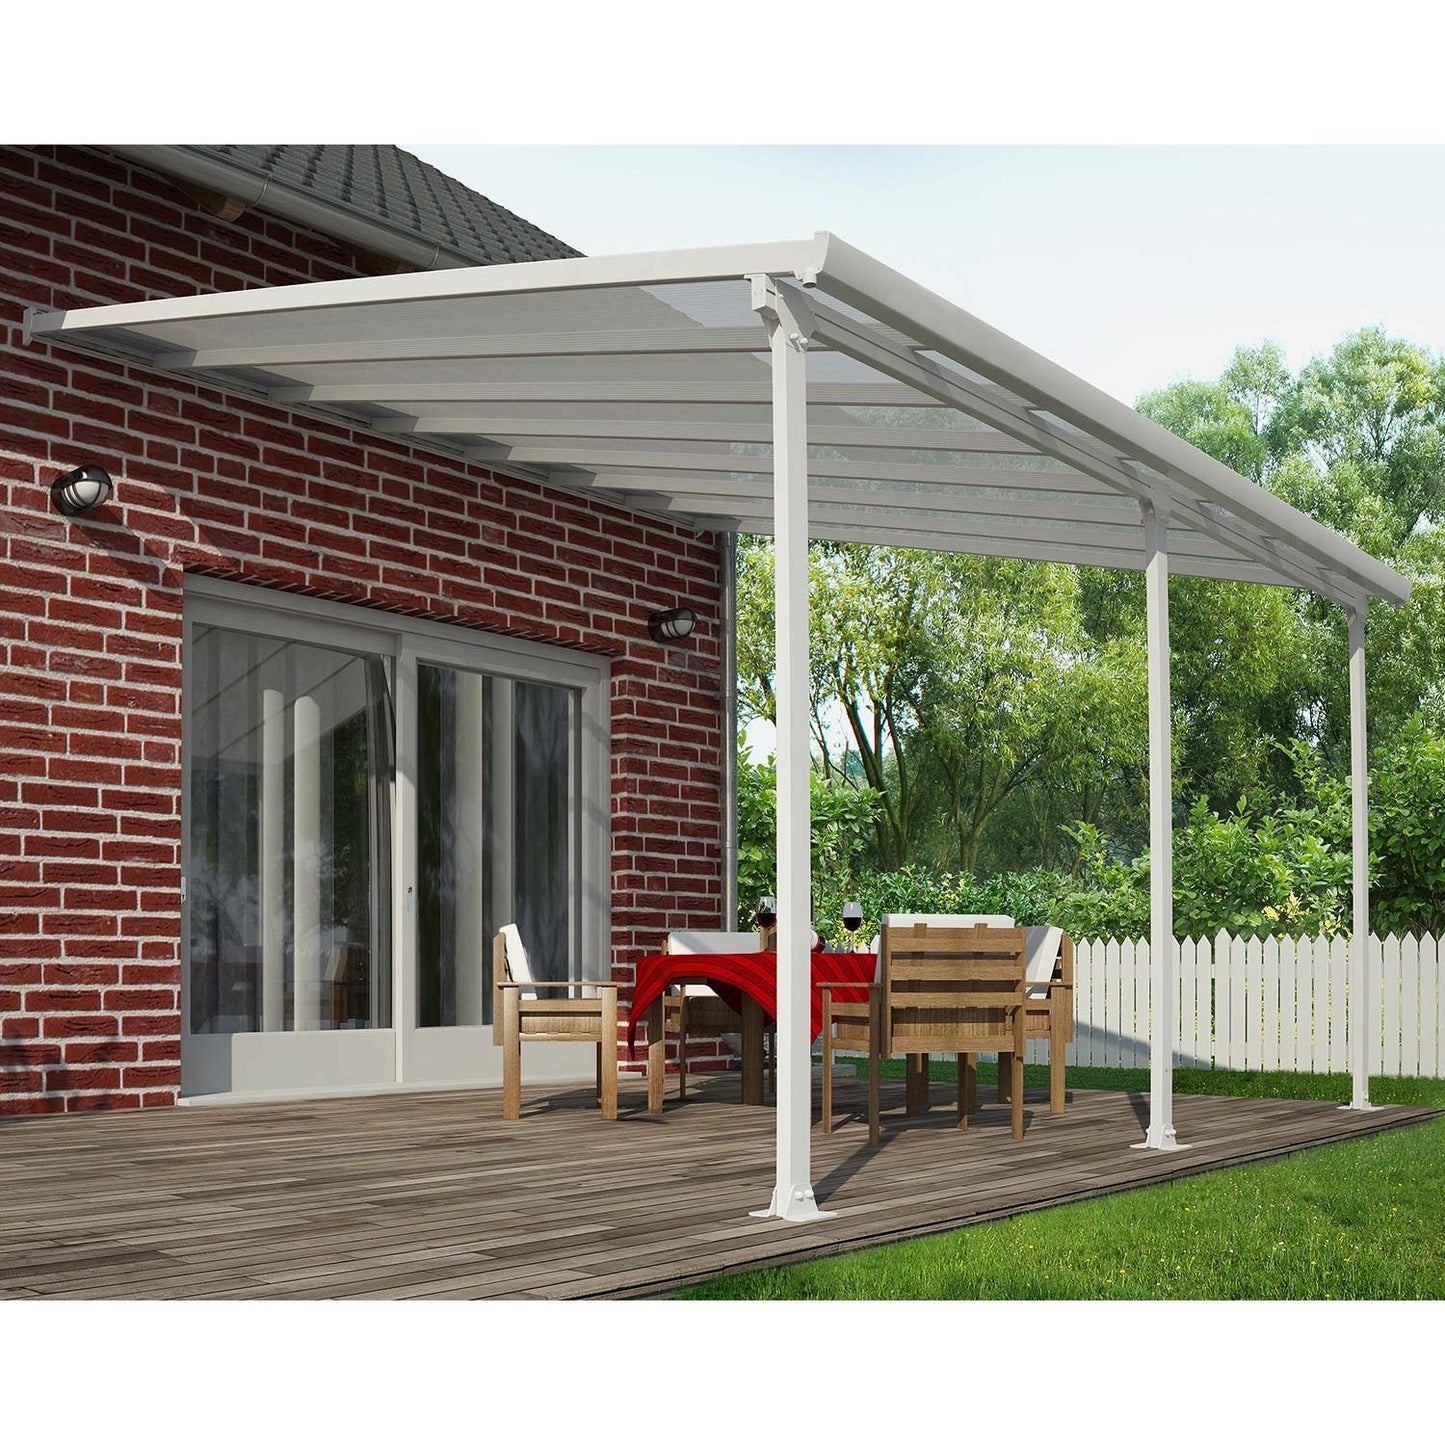 Palram - Canopia SanRemo 13' x 14' Patio Enclosure - Gray/Clear with Screen doors (6)